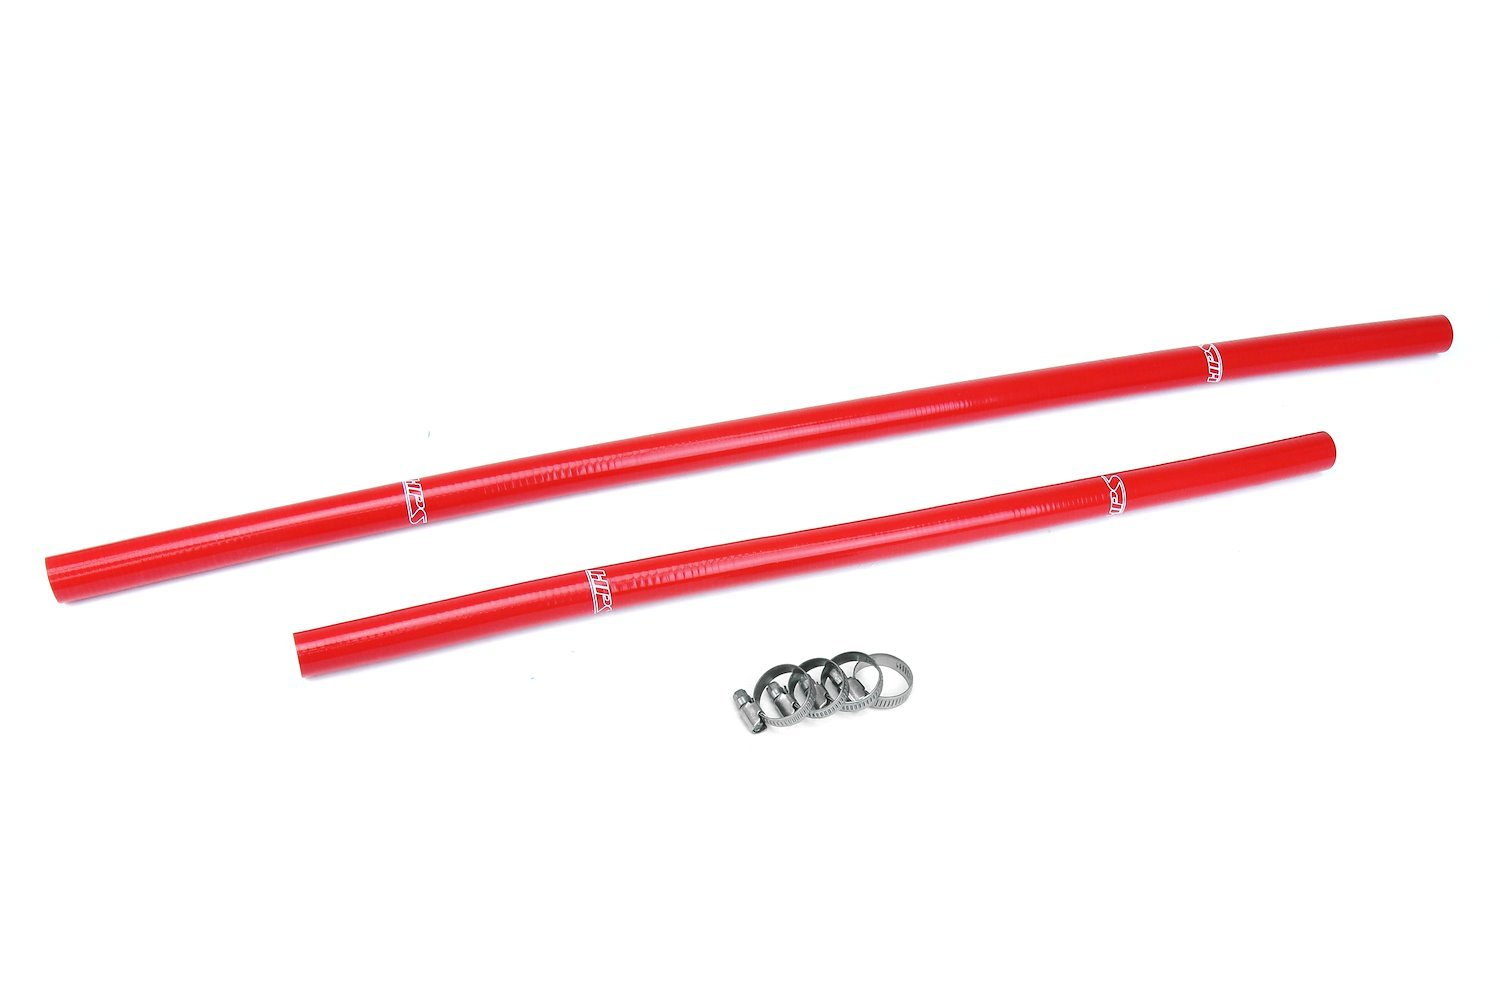 57-1910-RED Heater Hose Kit, 3-Ply Reinforced Silicone, Replaces OEM Rubber Heater Coolant Hoses